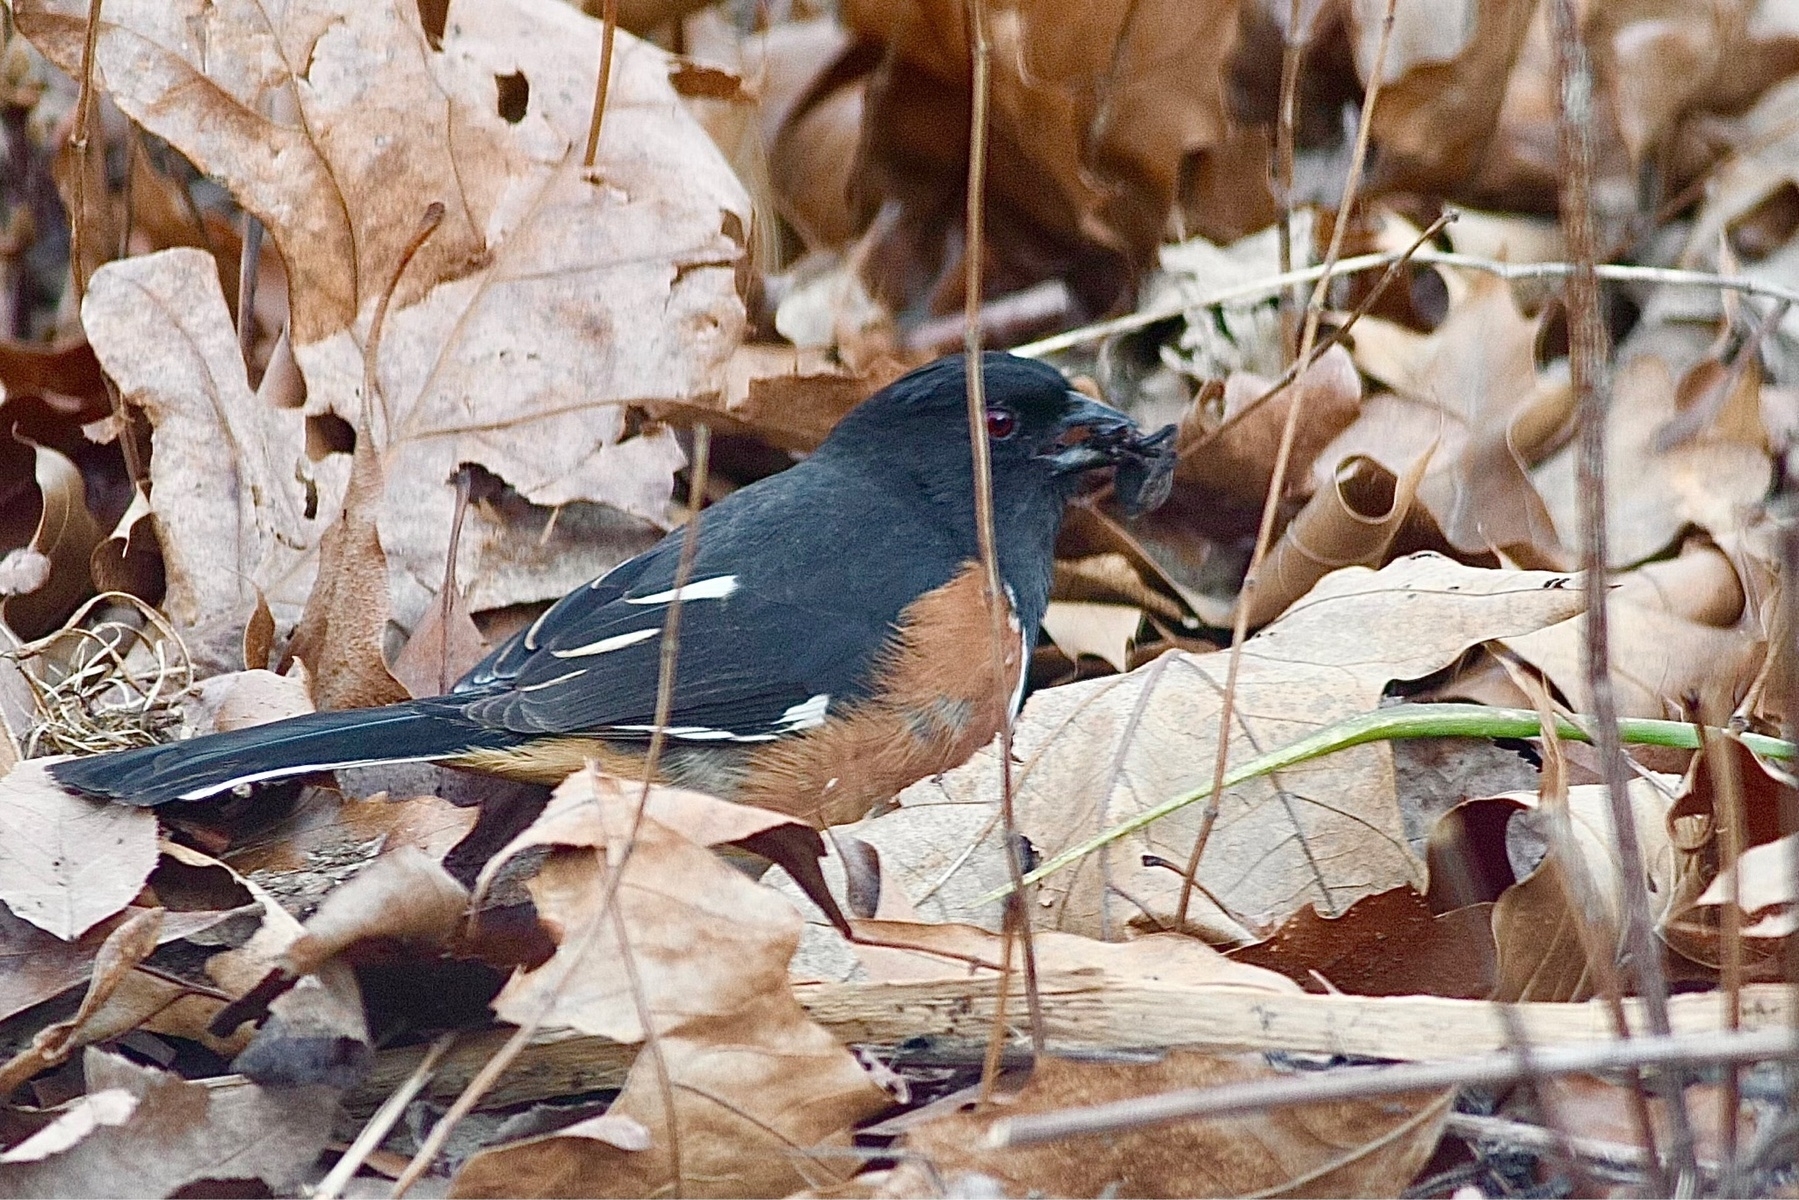 A bird with a black backside and  orangeish brown front side is foraging amongst winter leaves on the ground. Upon closer inspection, it can be seen that the bird is holding a brown spider in its beak.